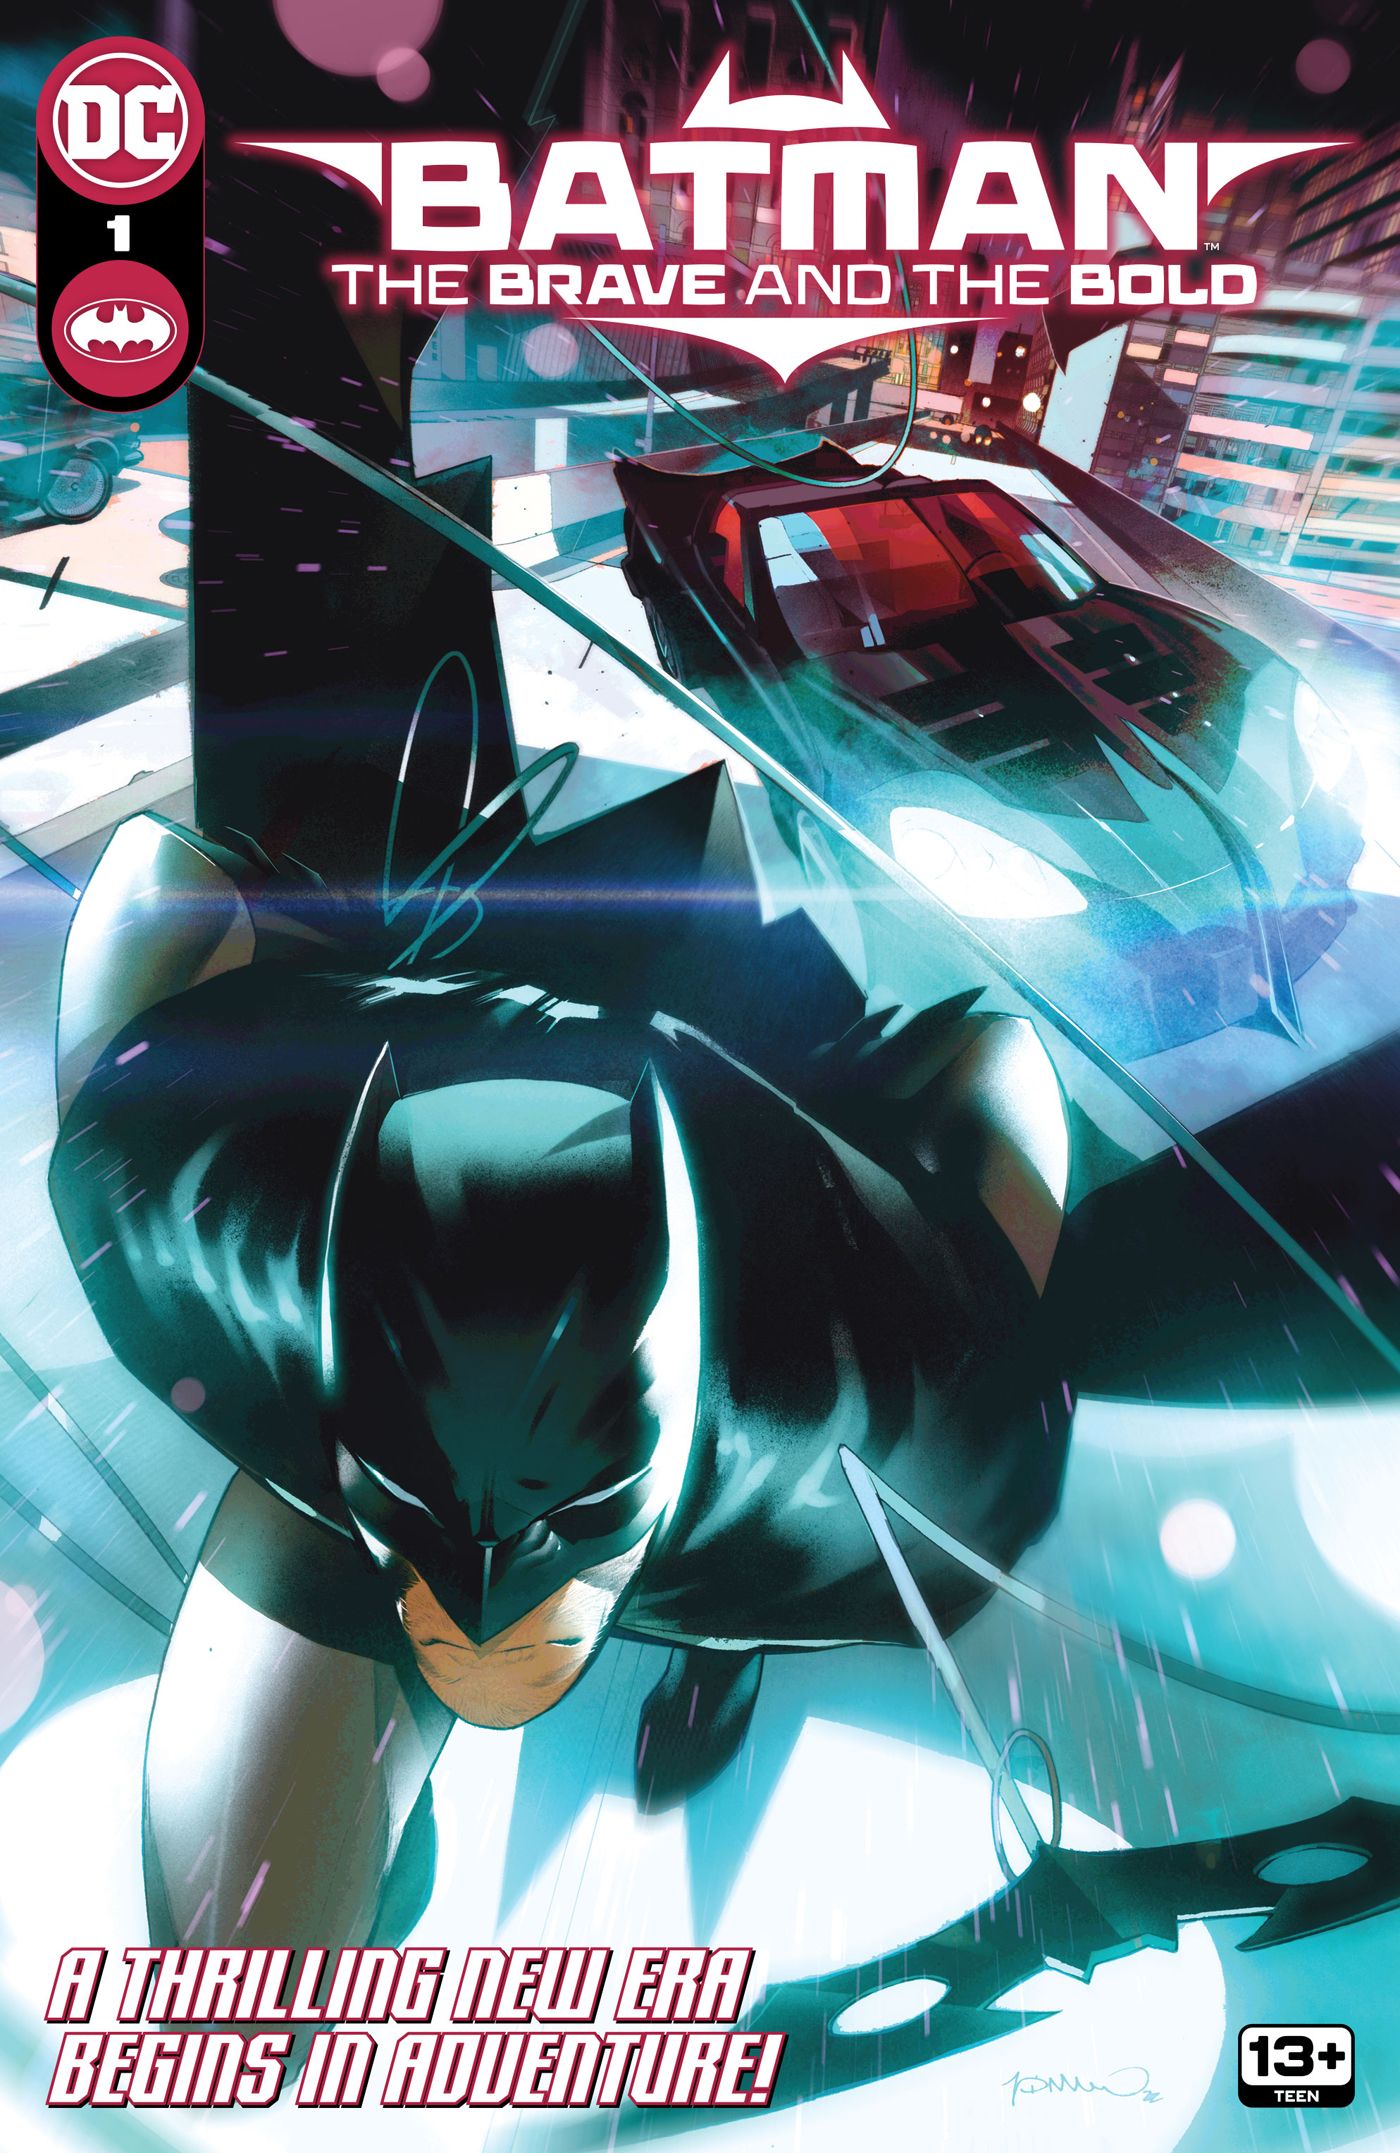 An early look at Batman: The Brave and the Bold #1 (2023) from DC Comics.